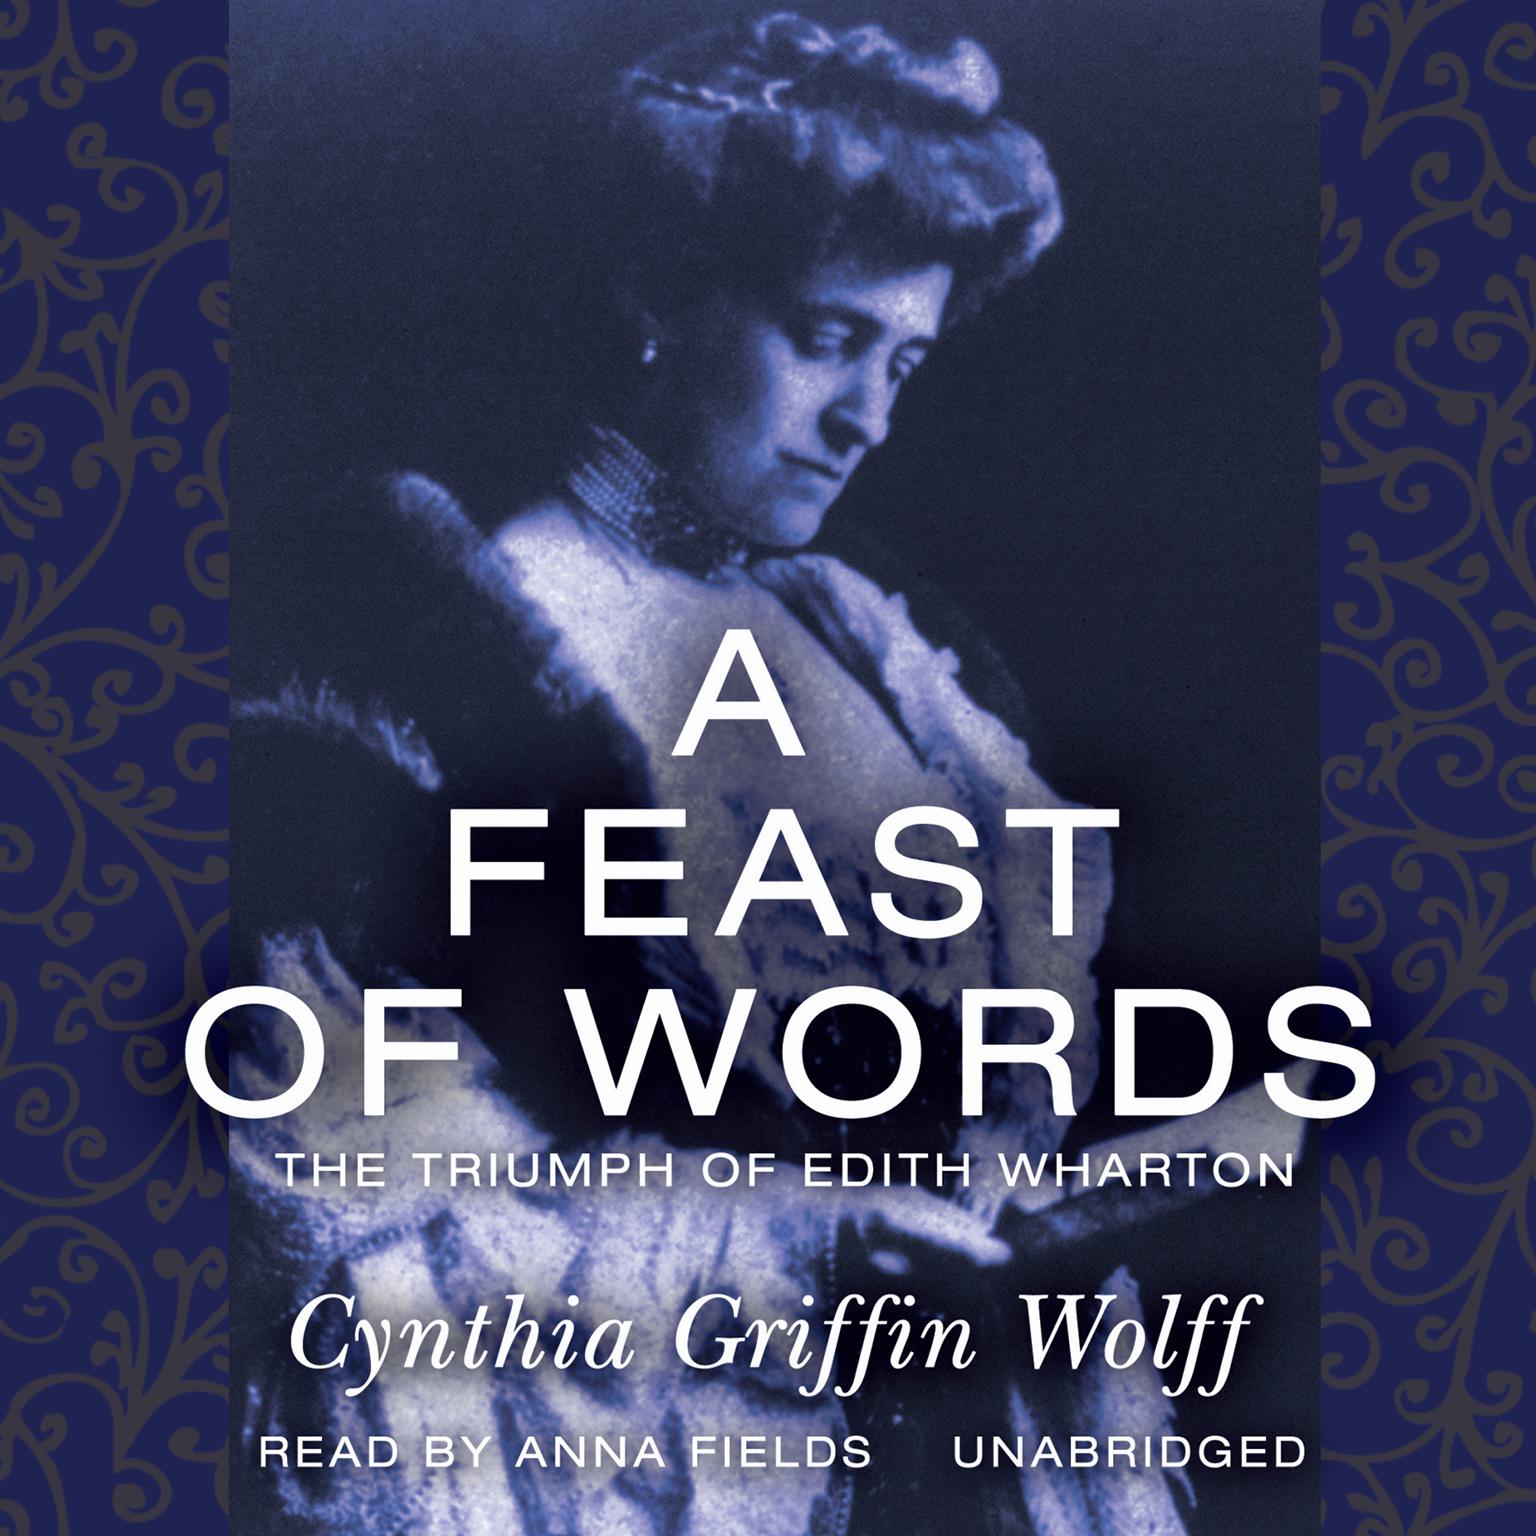 A Feast of Words: The Triumph of Edith Wharton Audiobook, by Cynthia Griffin Wolff